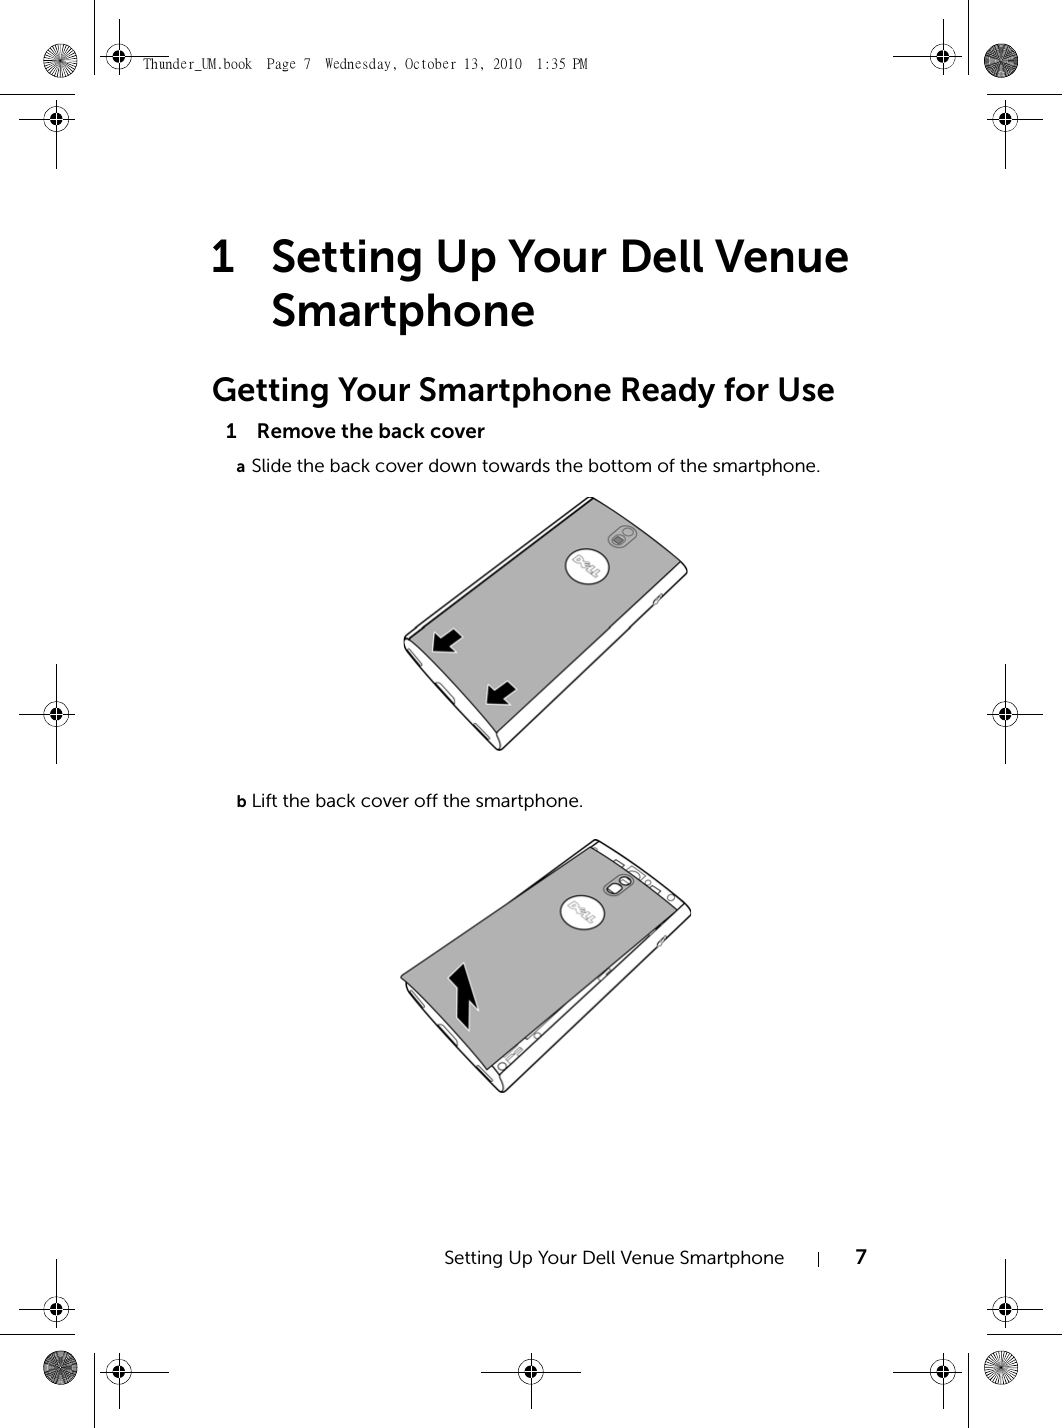 Setting Up Your Dell Venue Smartphone 71 Setting Up Your Dell Venue SmartphoneGetting Your Smartphone Ready for Use1 Remove the back coveraSlide the back cover down towards the bottom of the smartphone.bLift the back cover off the smartphone.Thunder_UM.book  Page 7  Wednesday, October 13, 2010  1:35 PM